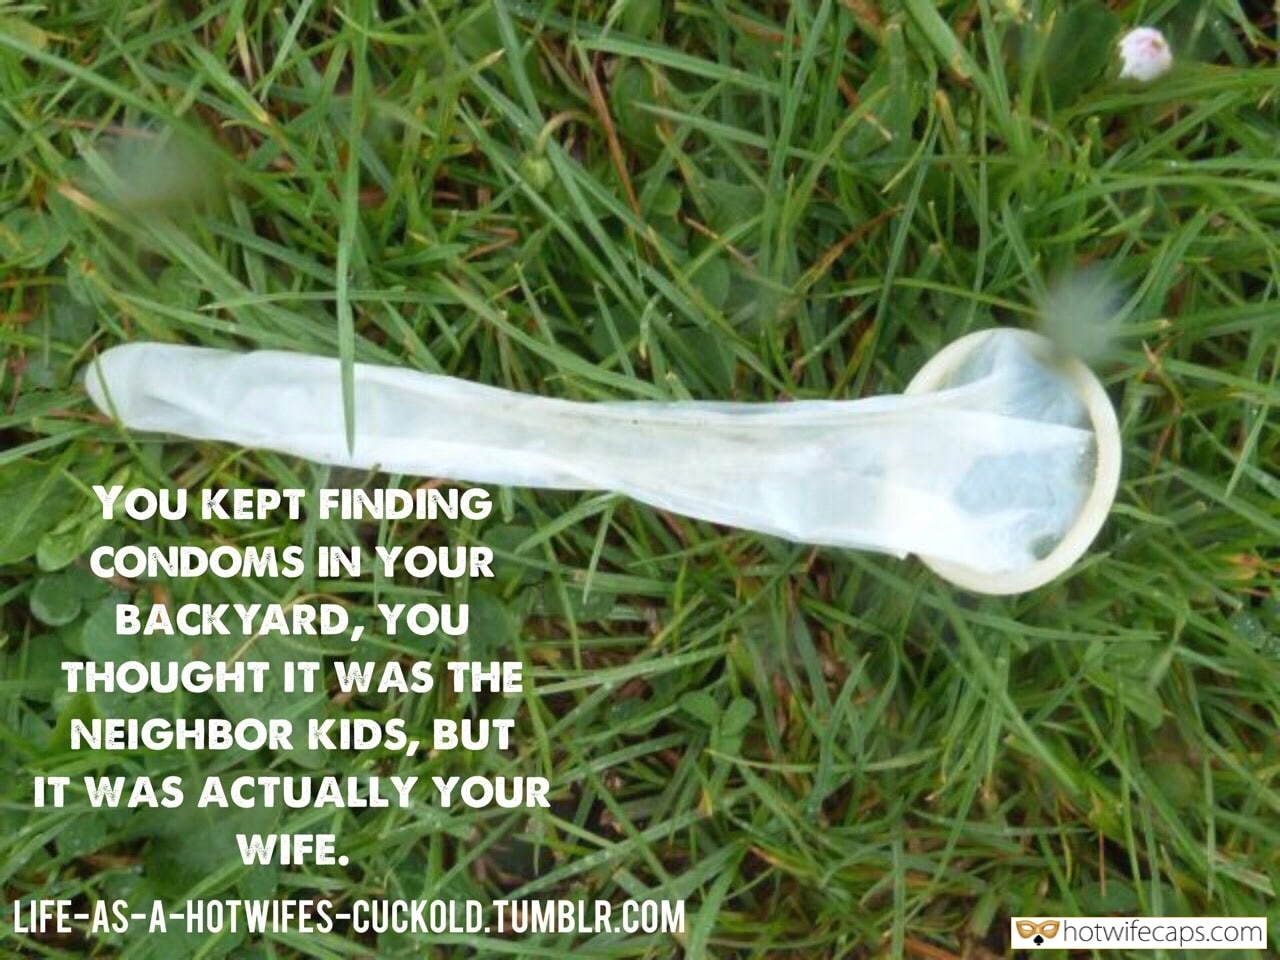 hotwife cuckold cheating captions hotwife caption Your wife left long condom full of cum in your backyard